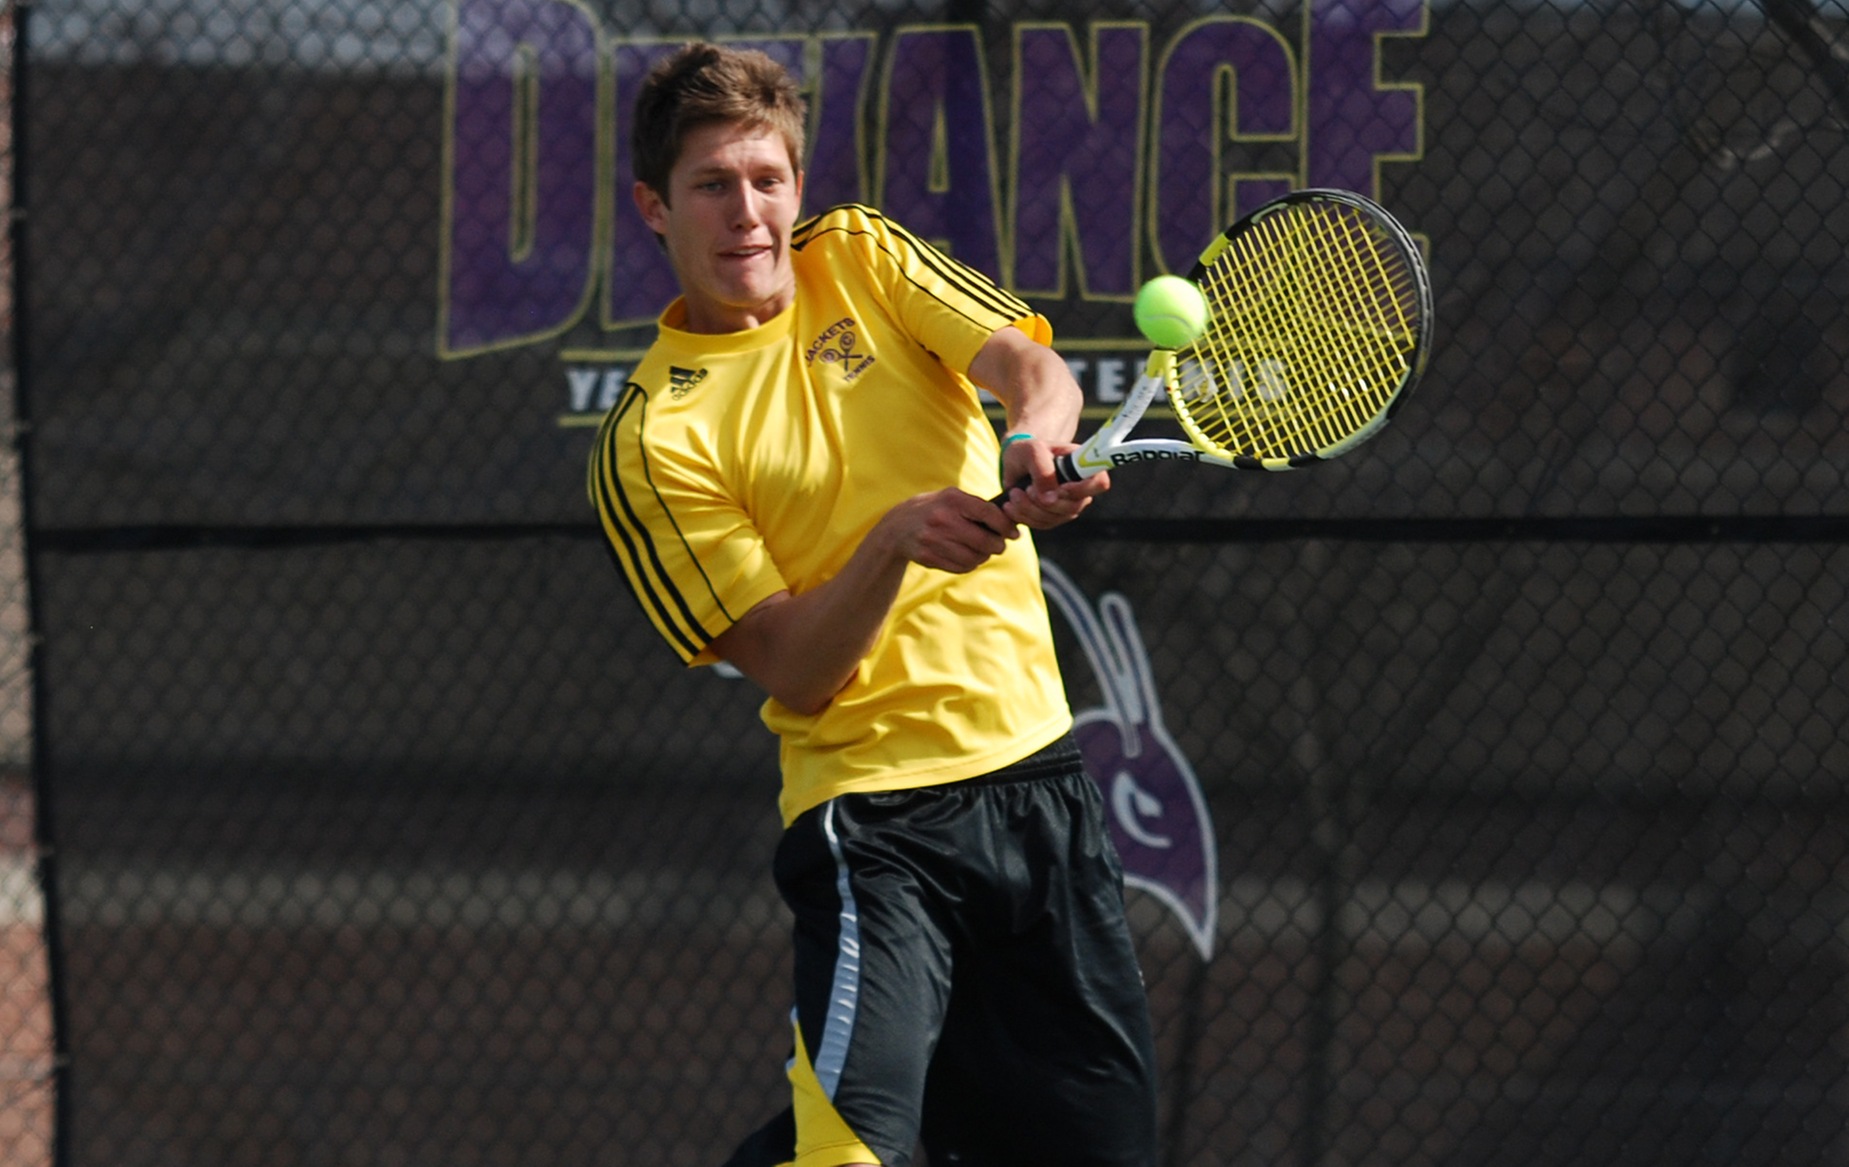 Jackets Blank Central State in Men’s Tennis Action